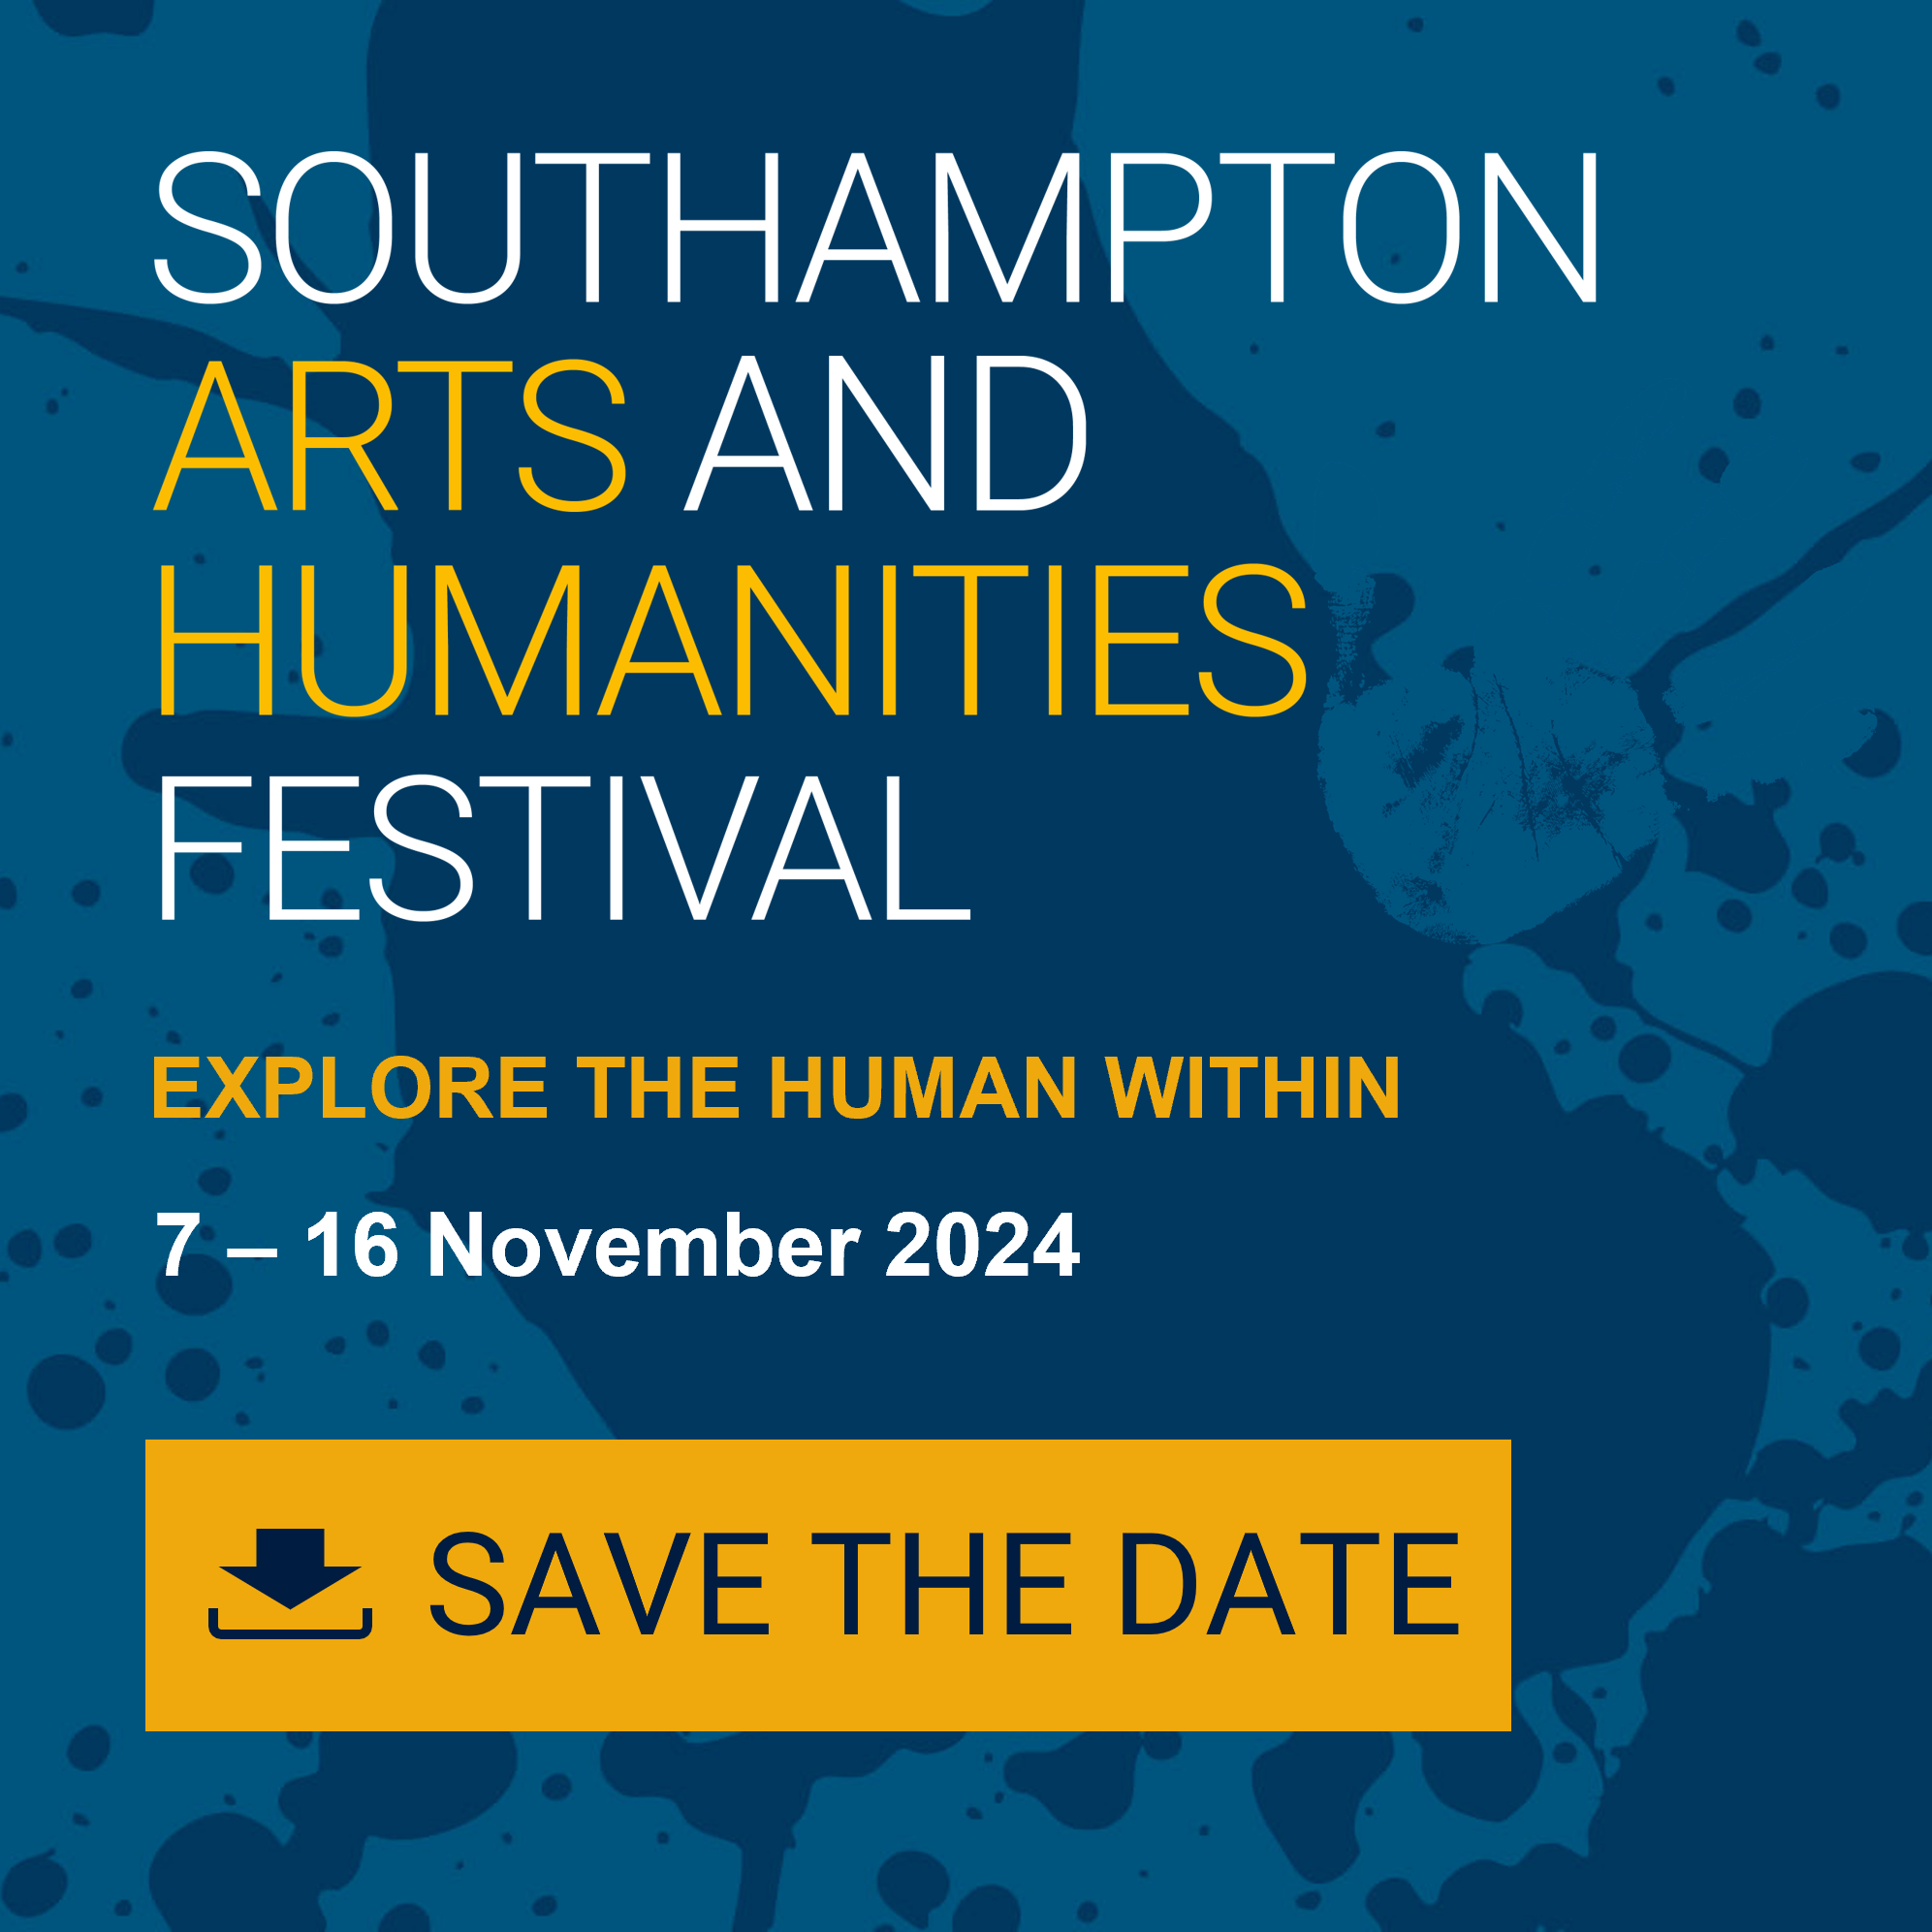 Interactive image on a blue background with text that says: Southampton Arts And Humanities Festival,
Explore the human within,
7 - 16 November 2024, Save the date. Action: you can click on the image to download the calendar file to add the event to your calendar.
